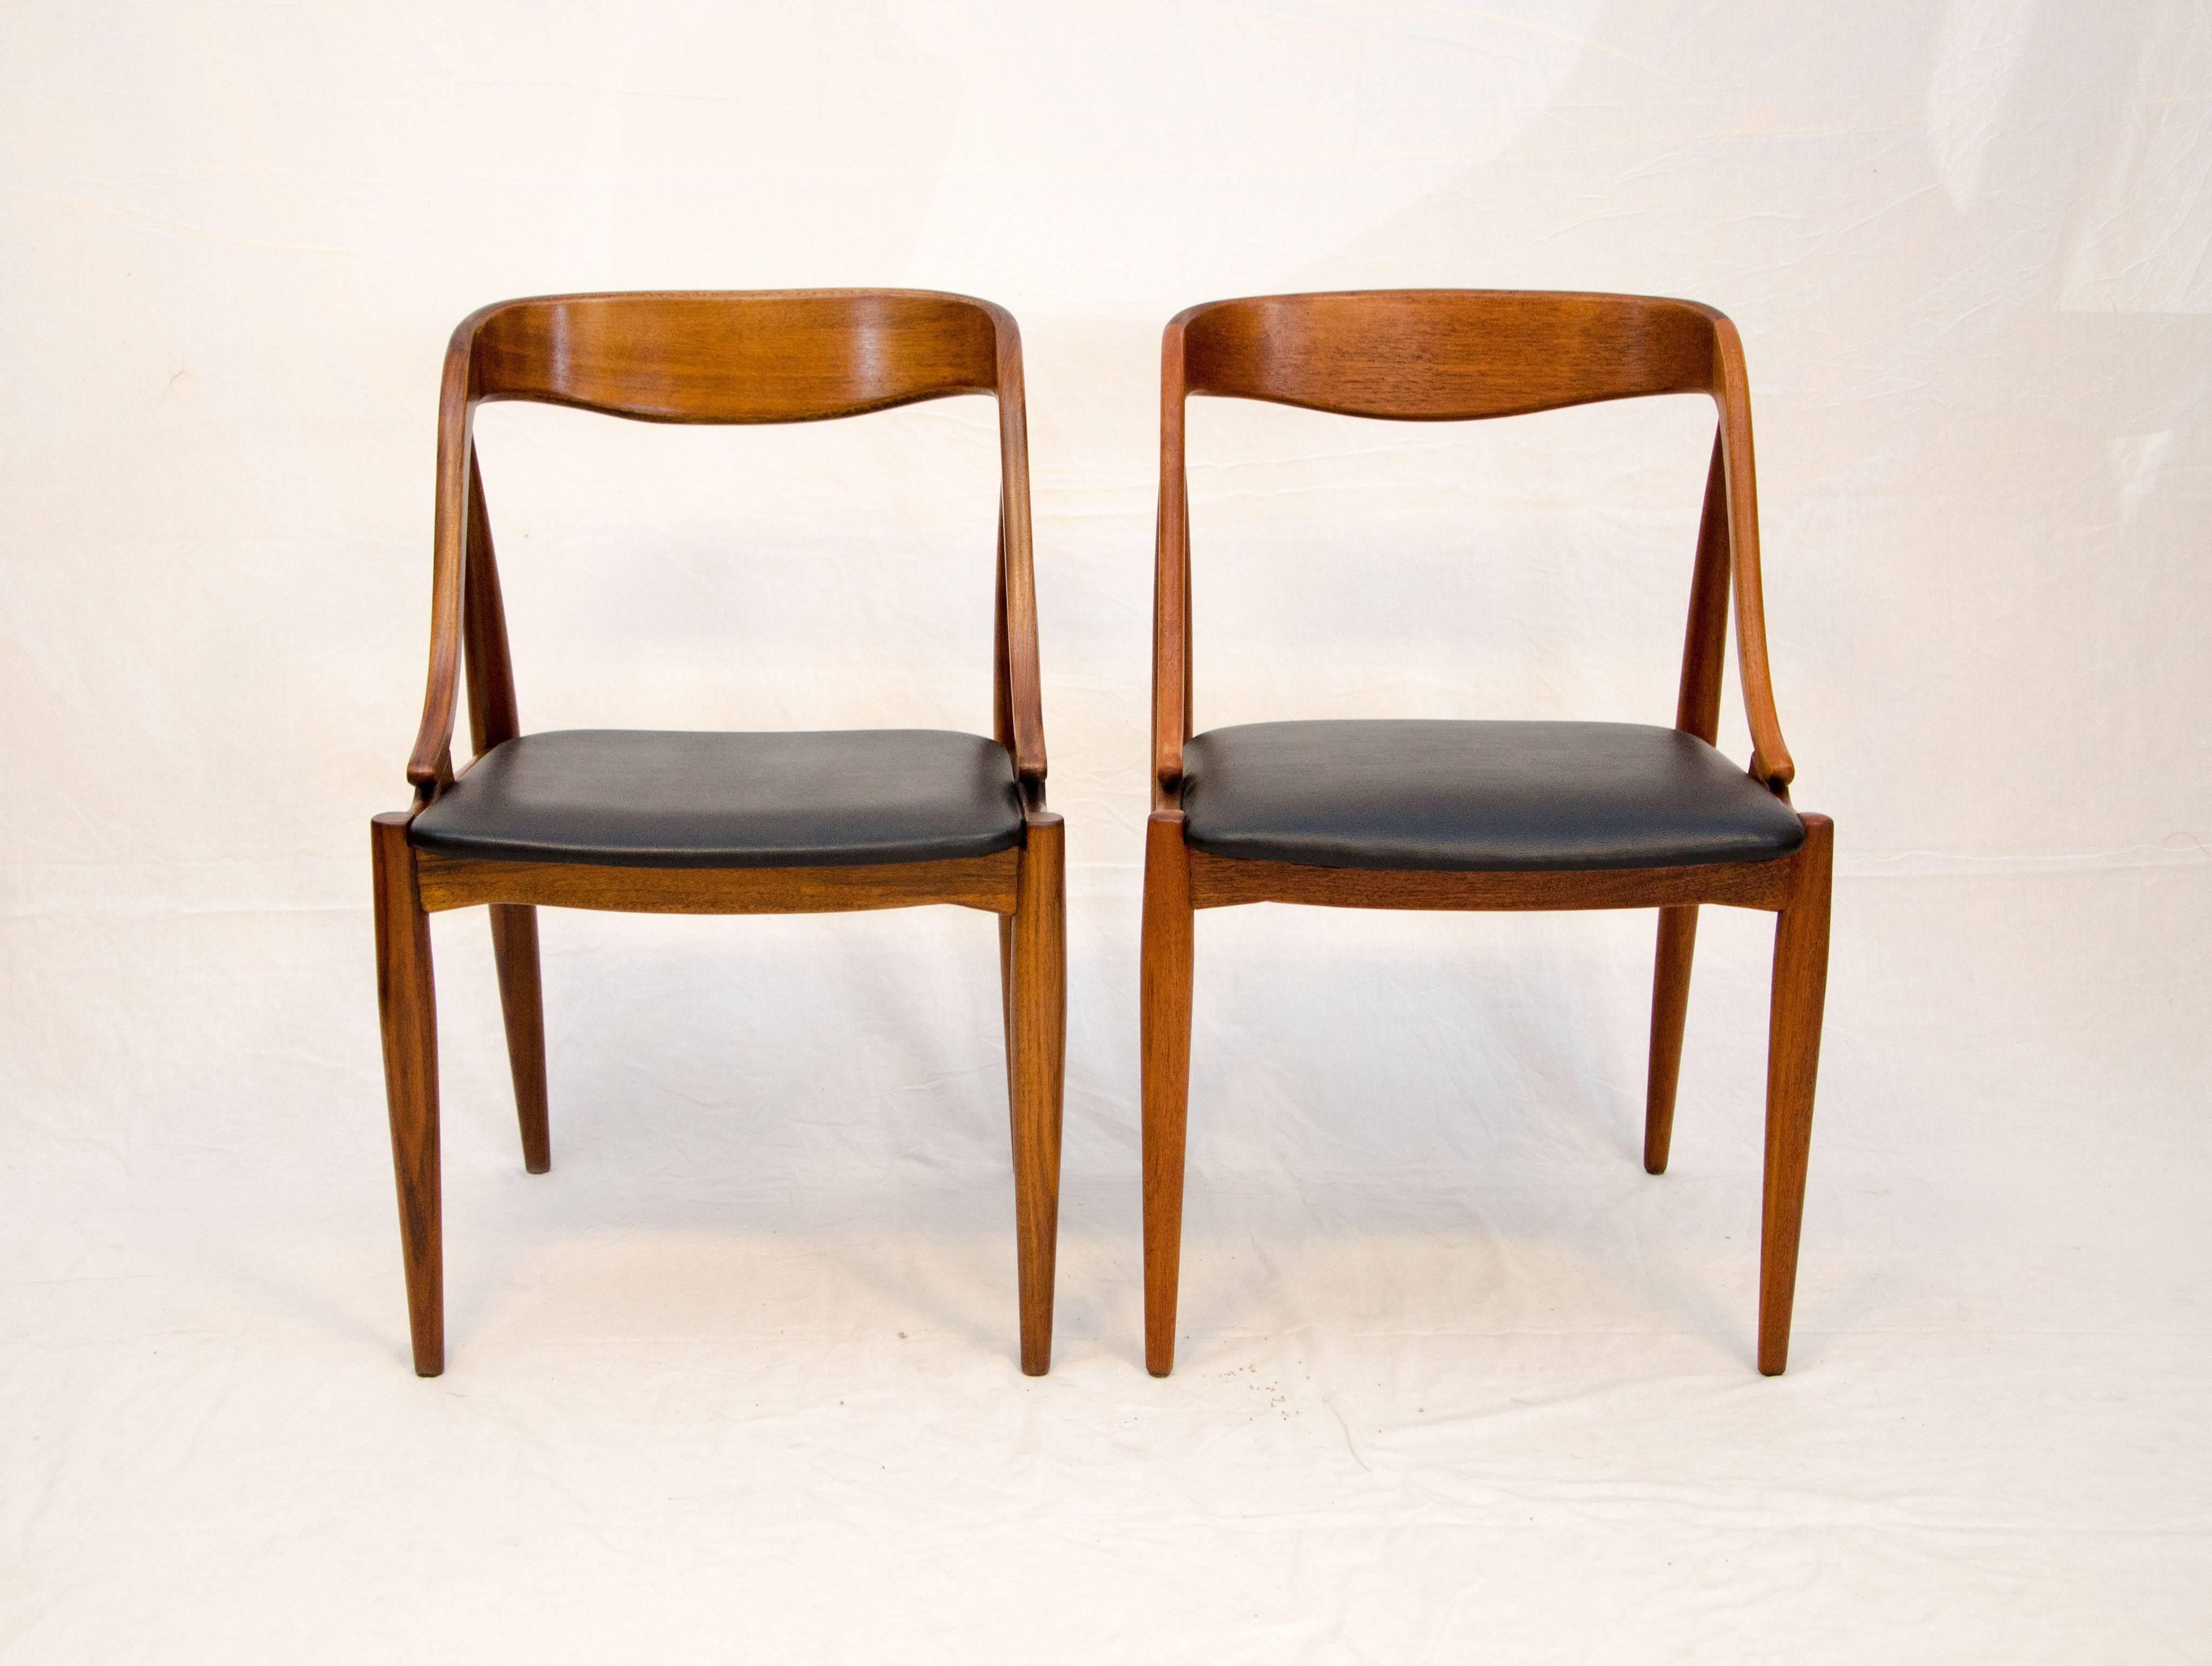 A pair of curved back dining chairs to add to your set. Perfect for a small breakfast table, as accent chairs in a bedroom, or even as desk chairs.